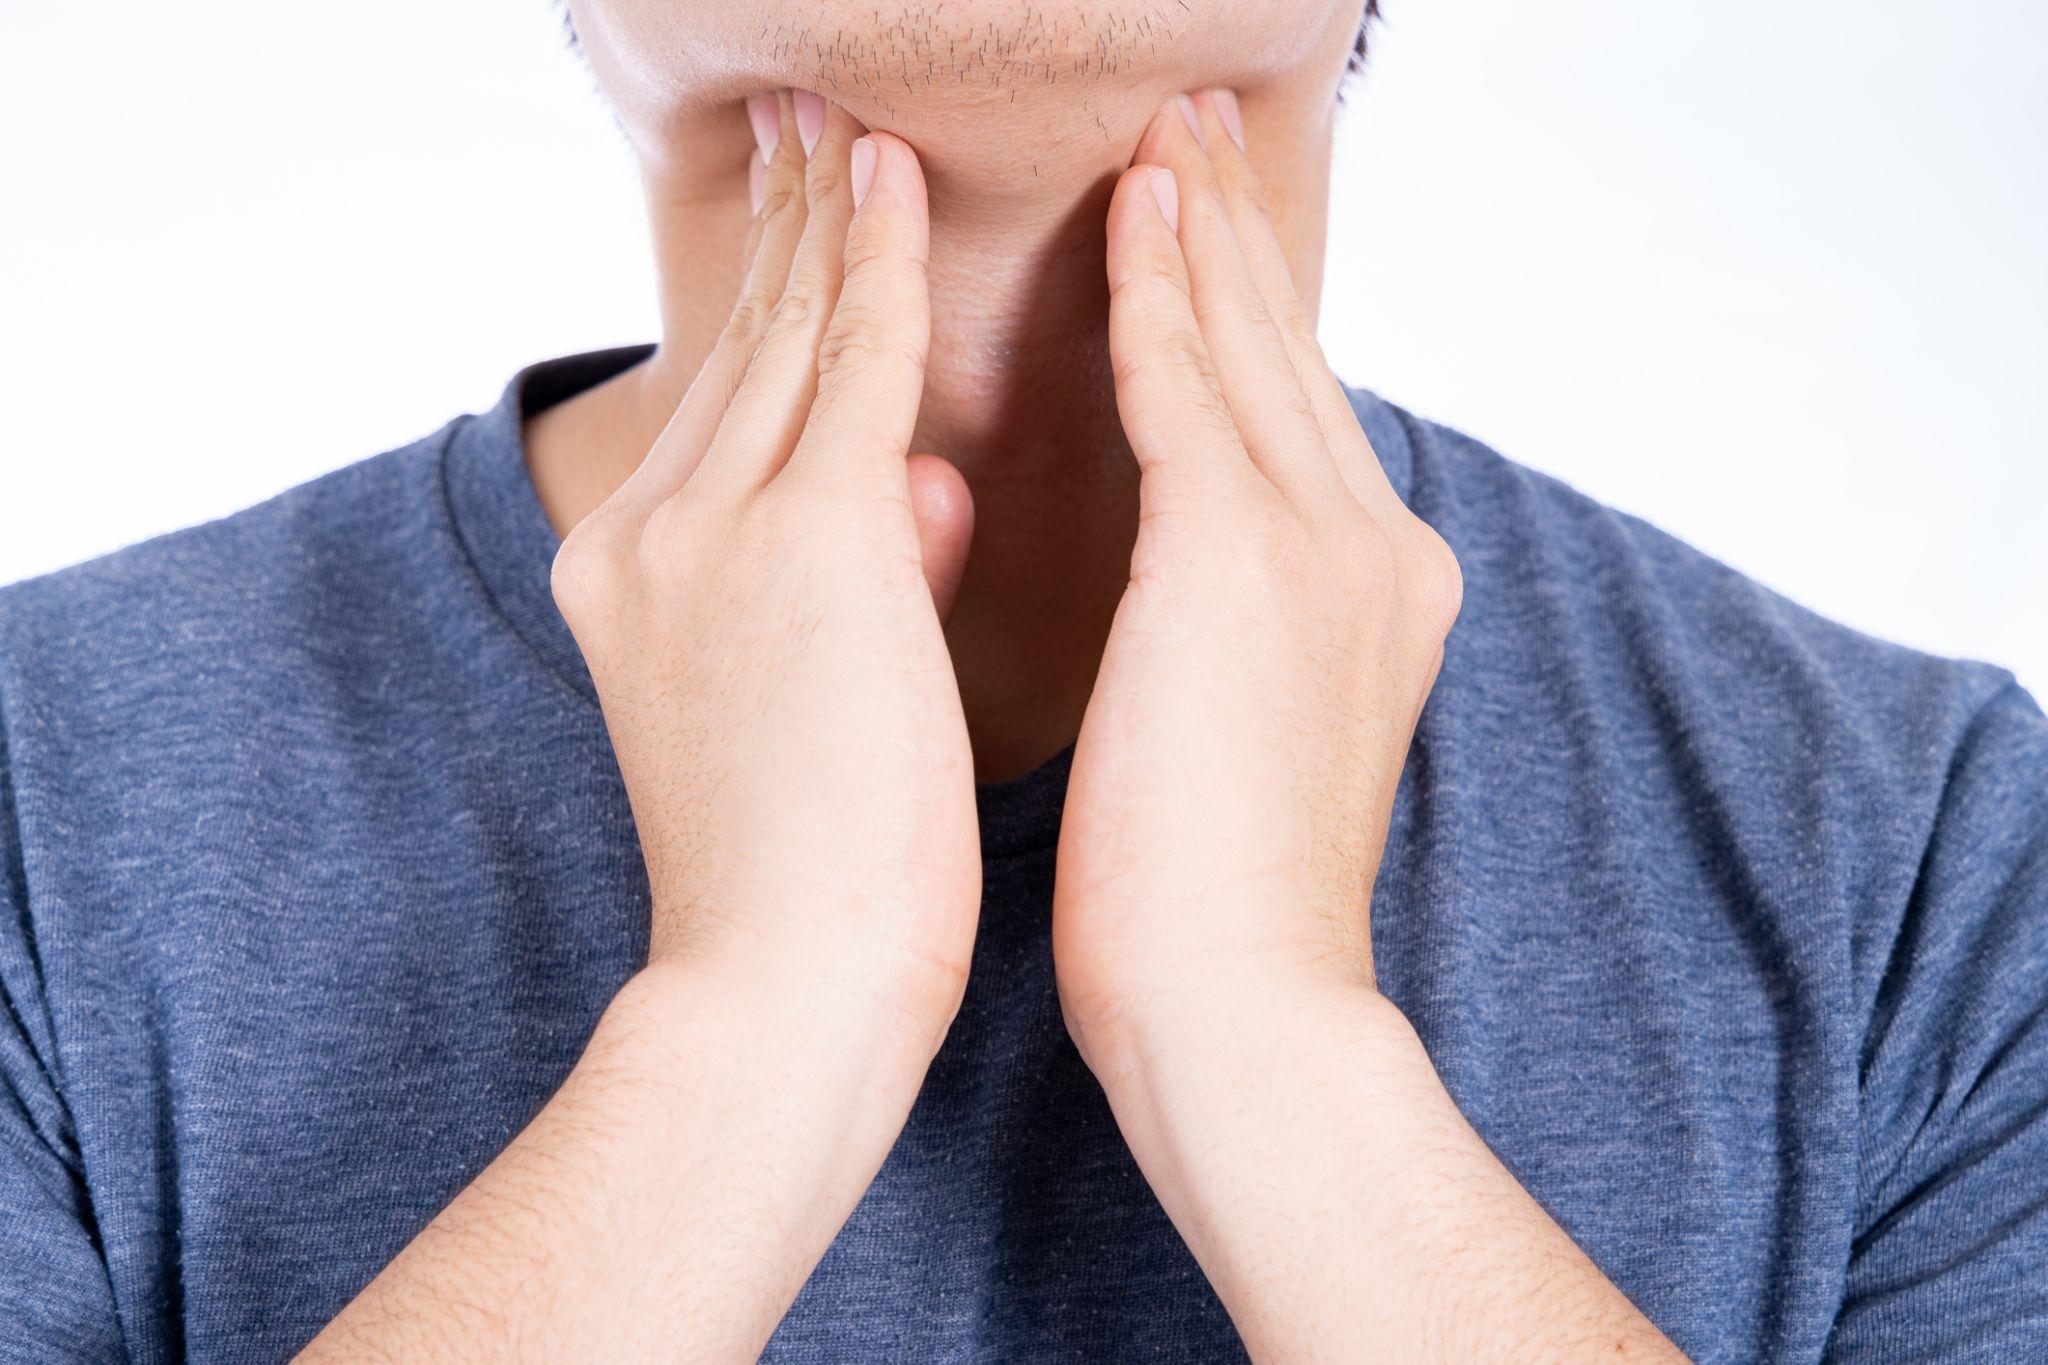 What are the Symptoms of Swollen Lymph Nodes under Jaw and the Treatment for Swollen Lymph Nodes under Jaw?